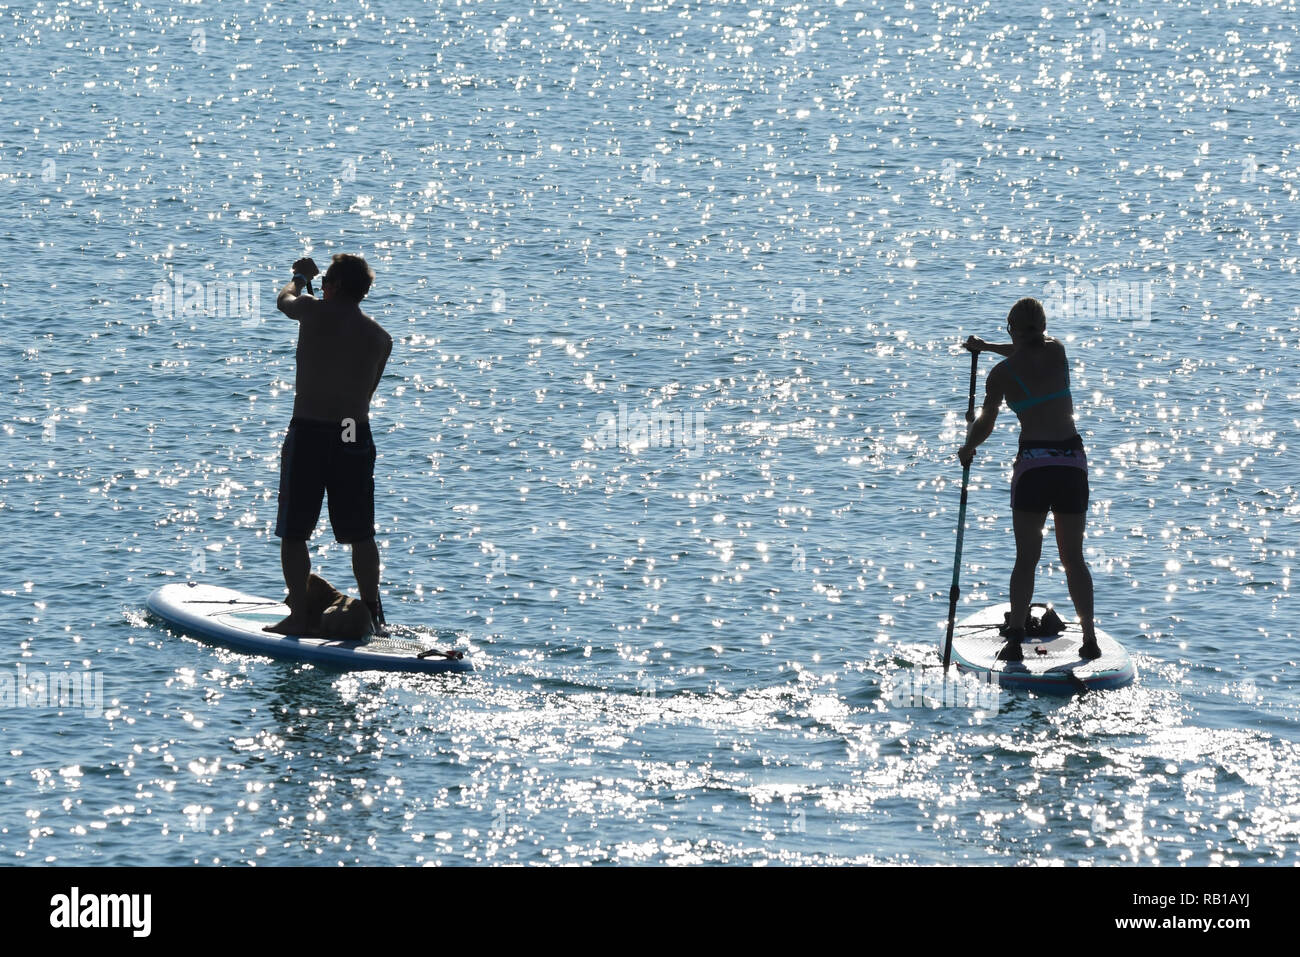 People paddle boarding at sea with sun sparkling on the water. Stock Photo